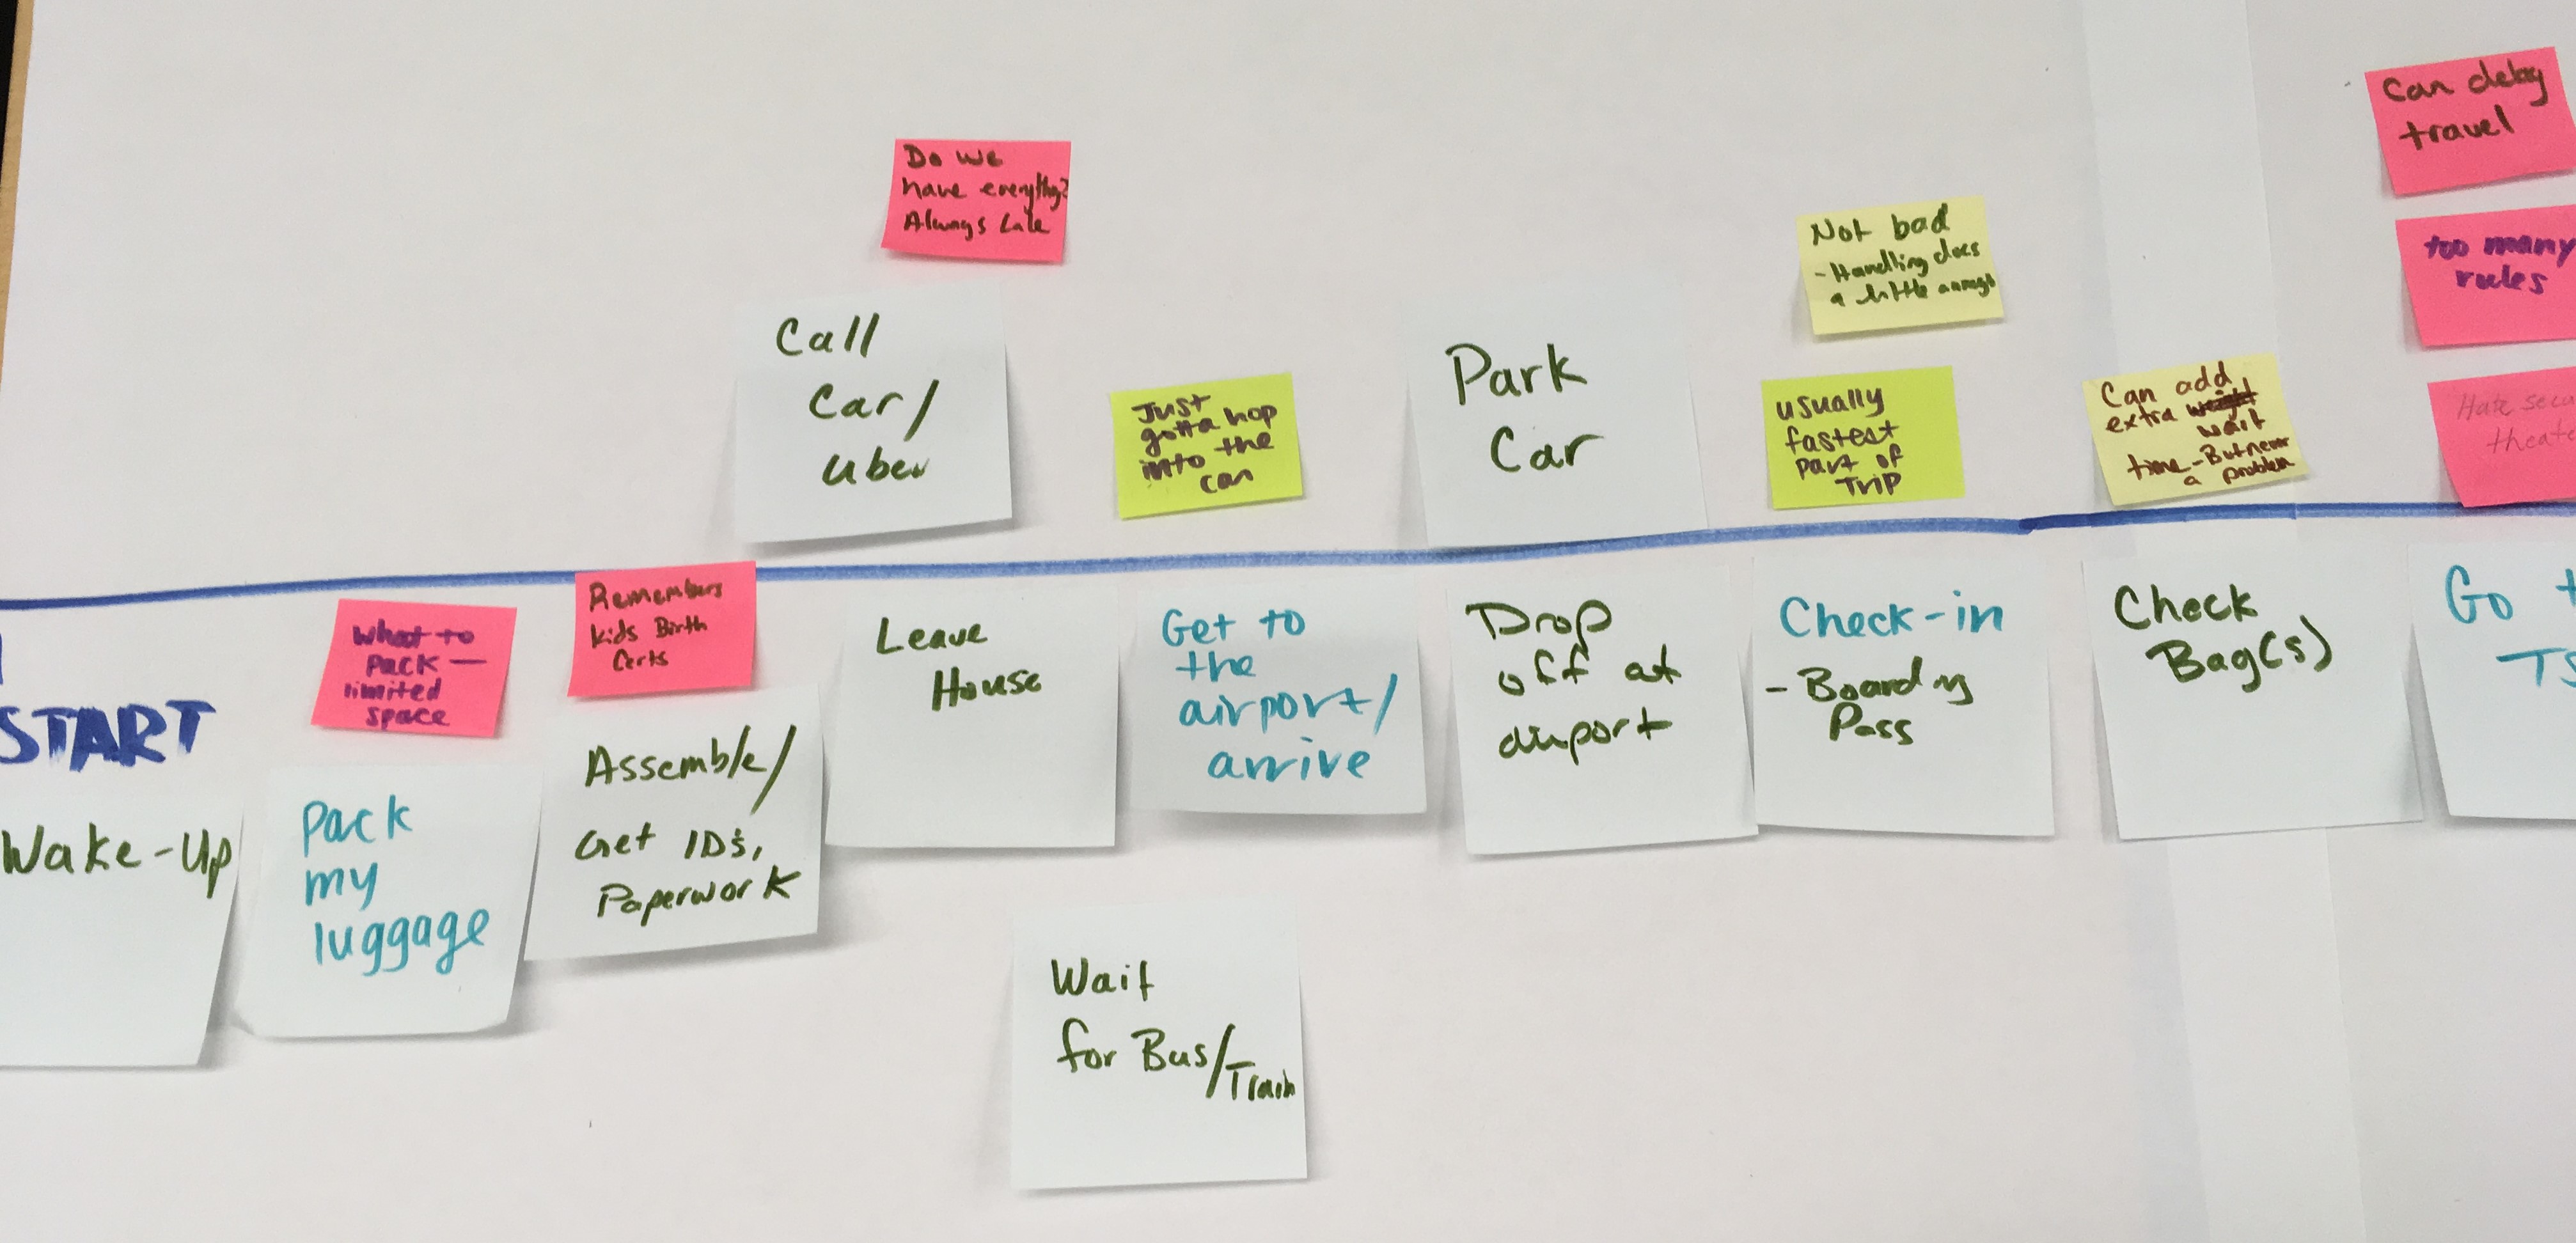 Tasks from Particpatory Design